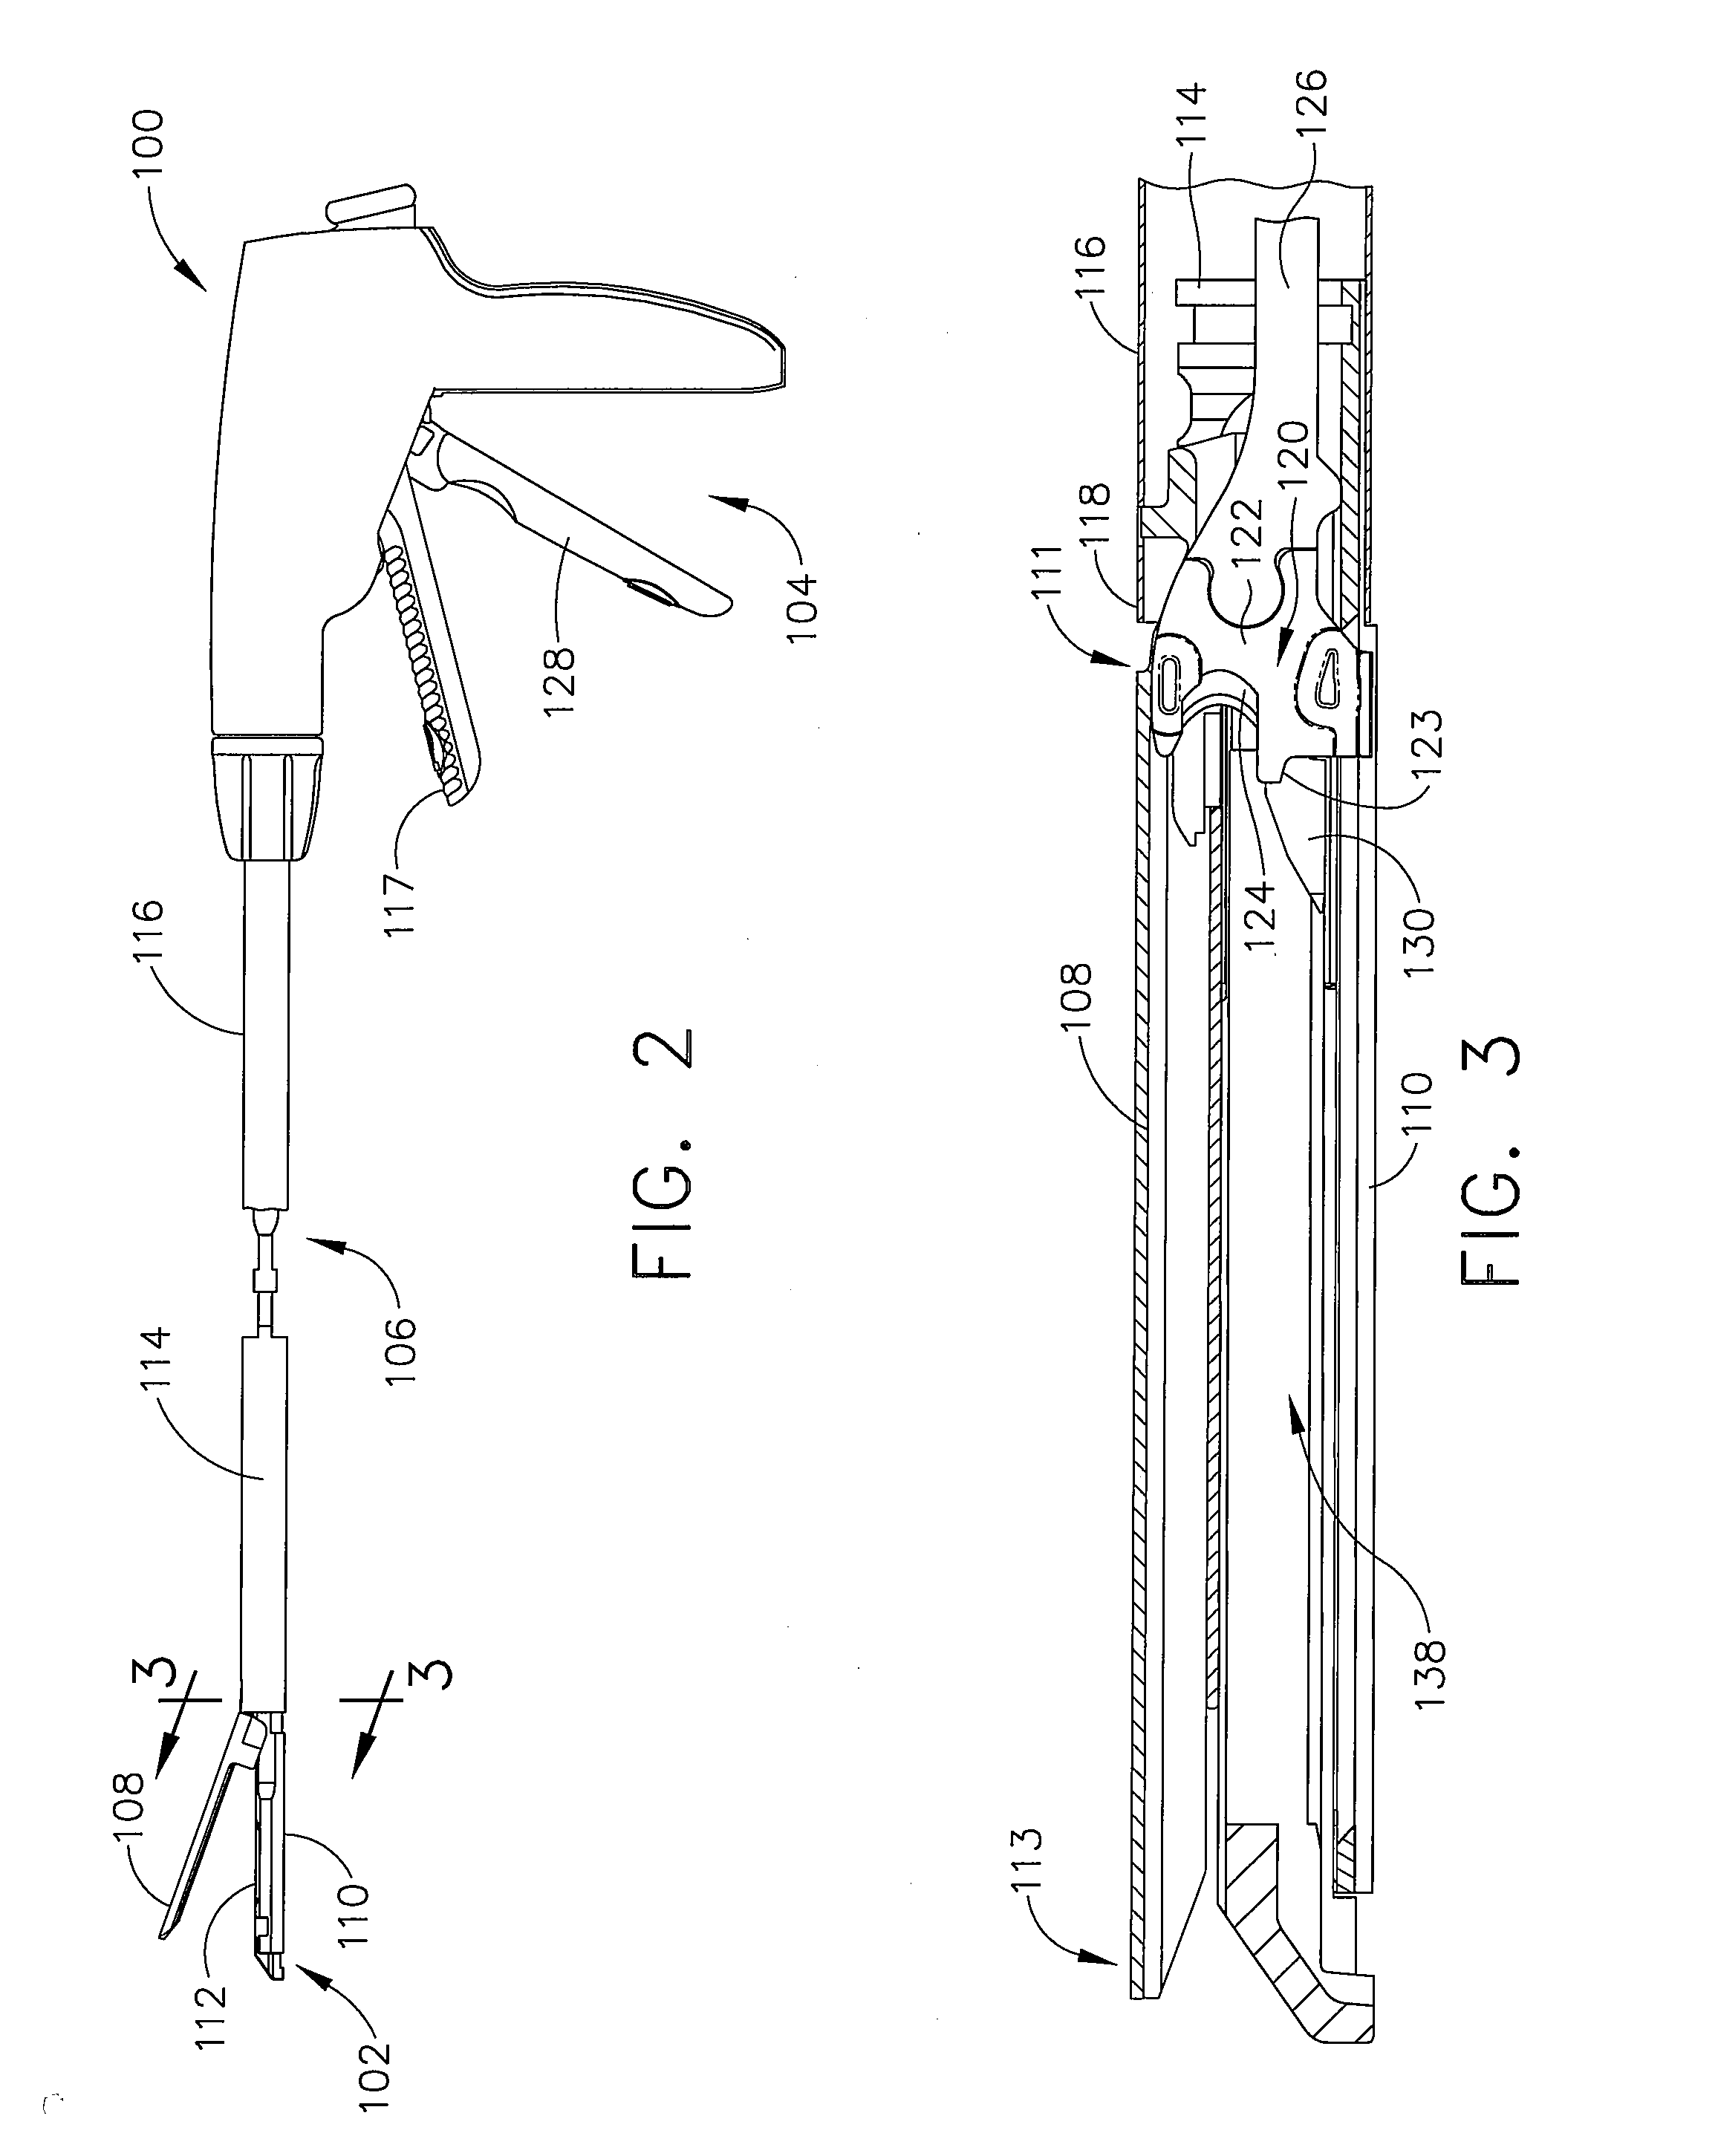 Curved end effector for a surgical stapling device